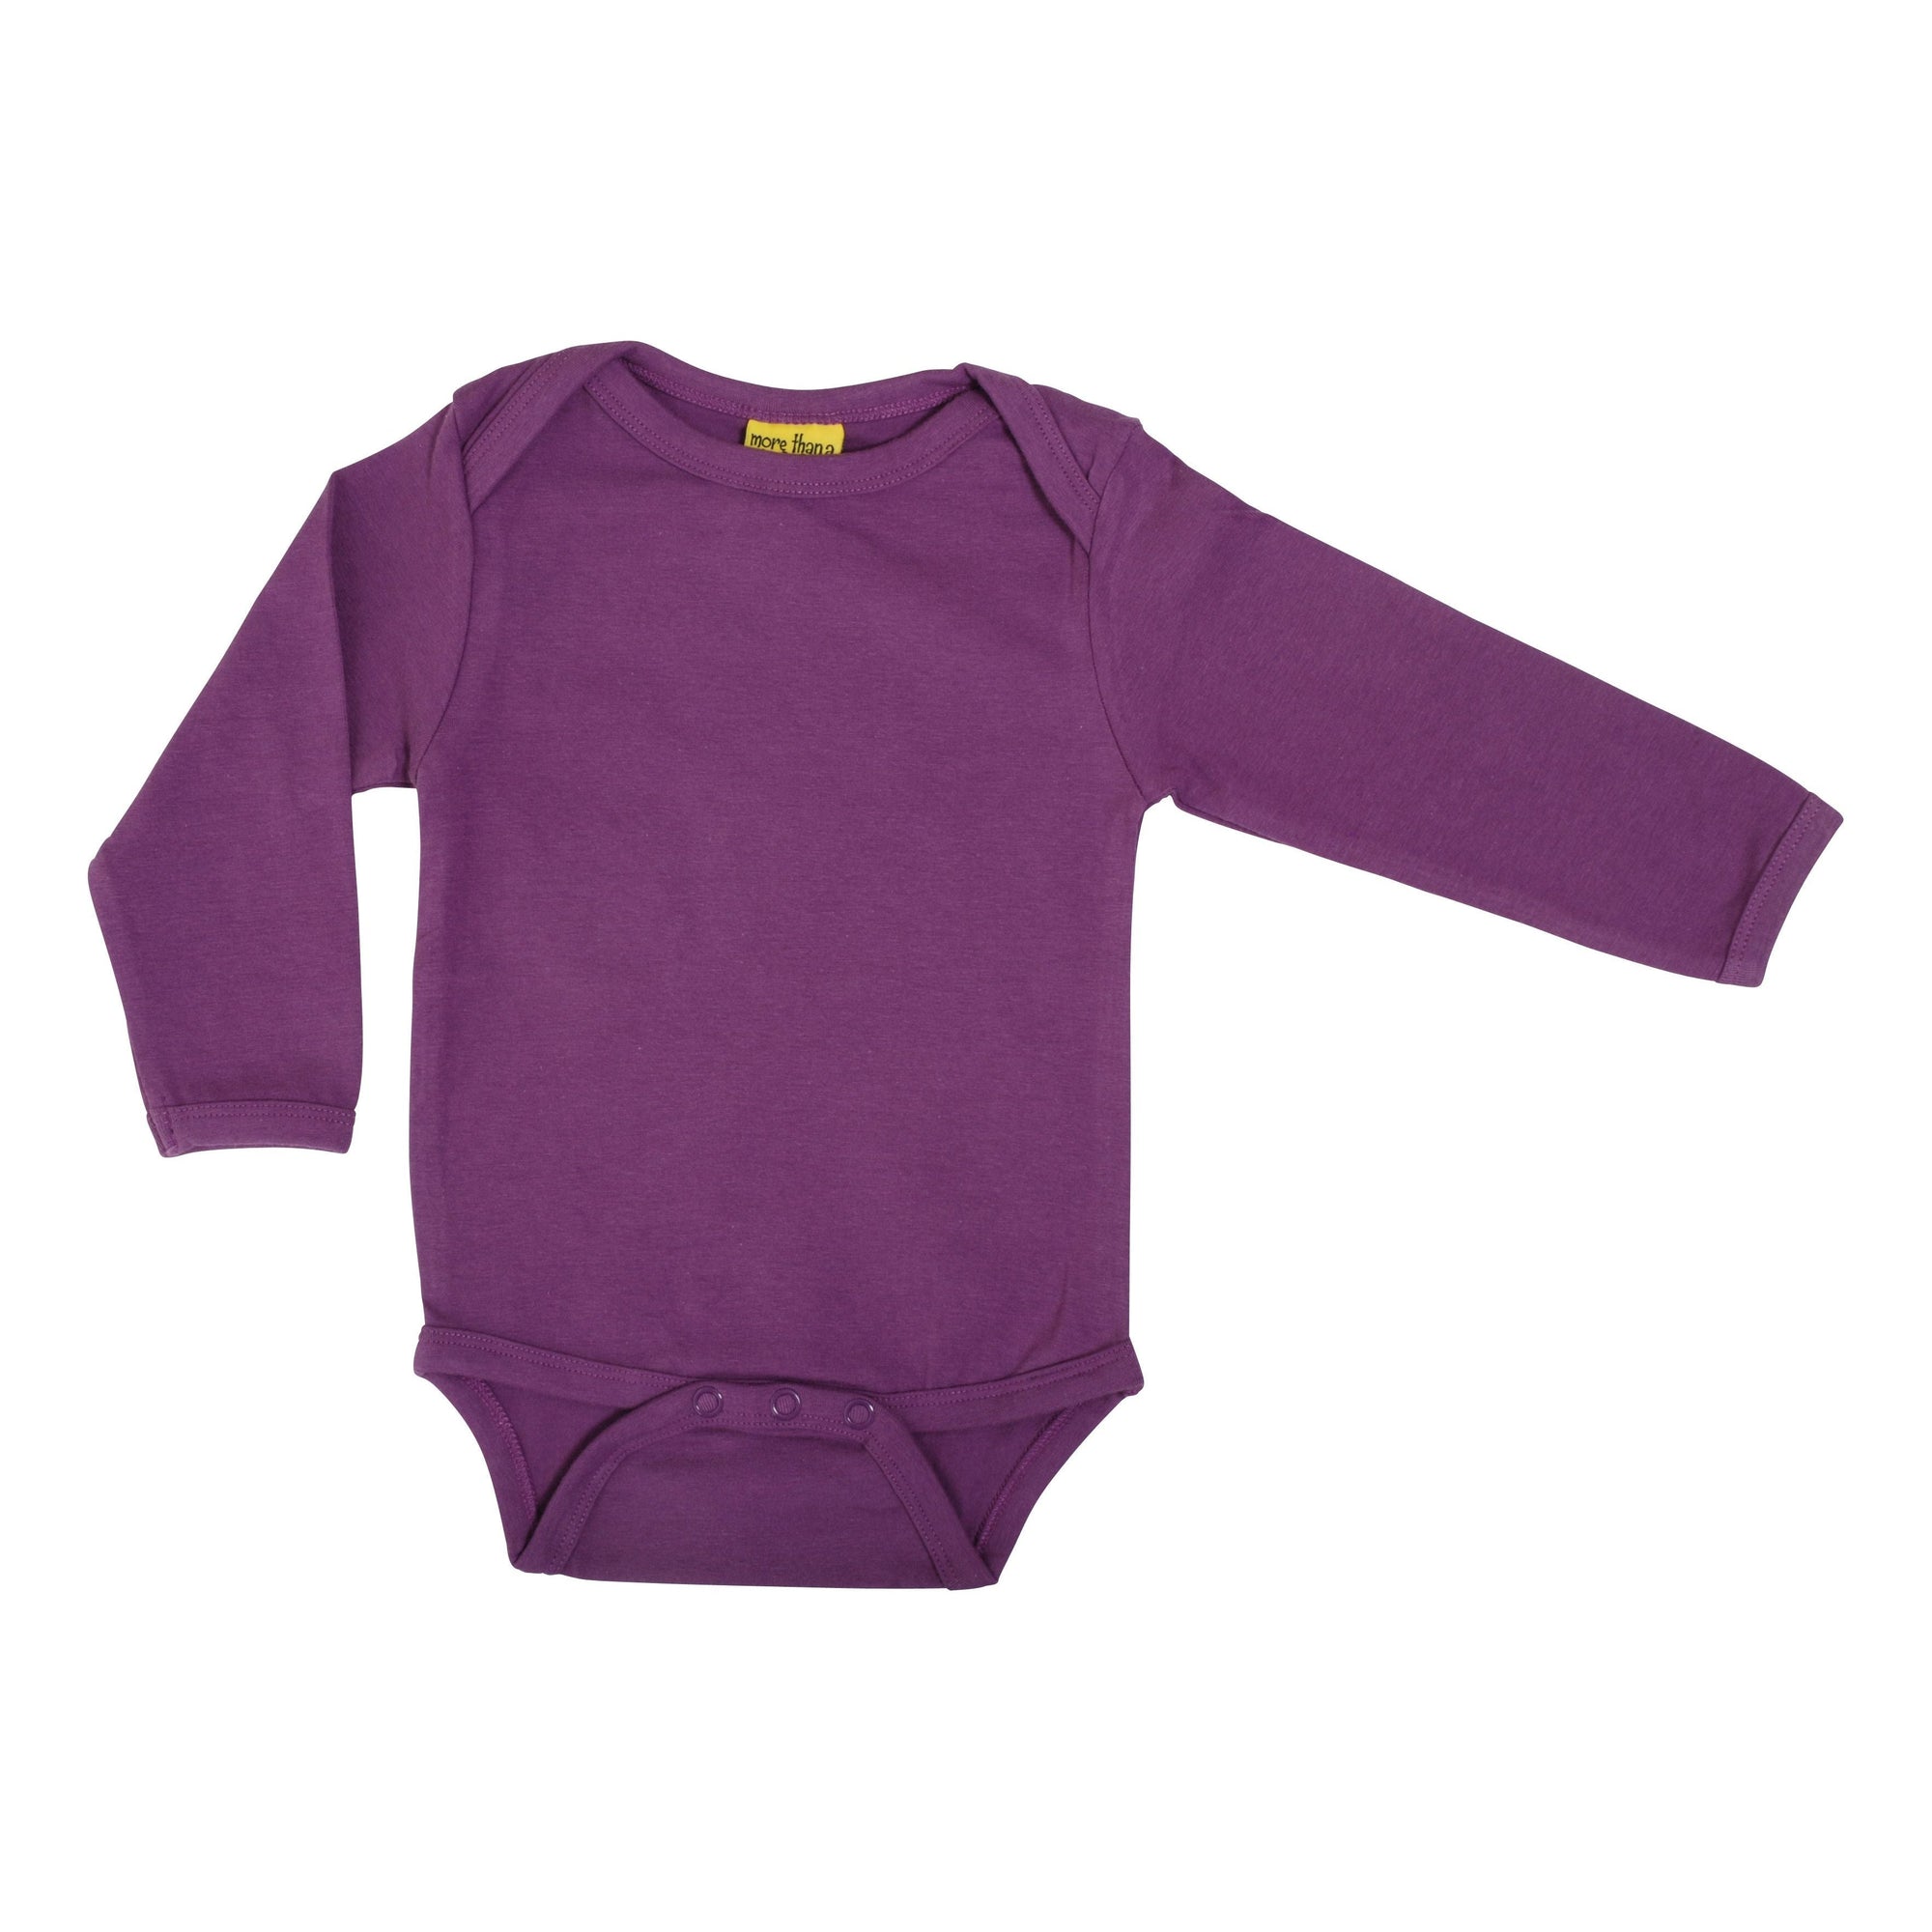 Crushed Grape Long Sleeve Onesie - 2 Left Size 1-2 & 2-3 months-More Than A Fling-Modern Rascals